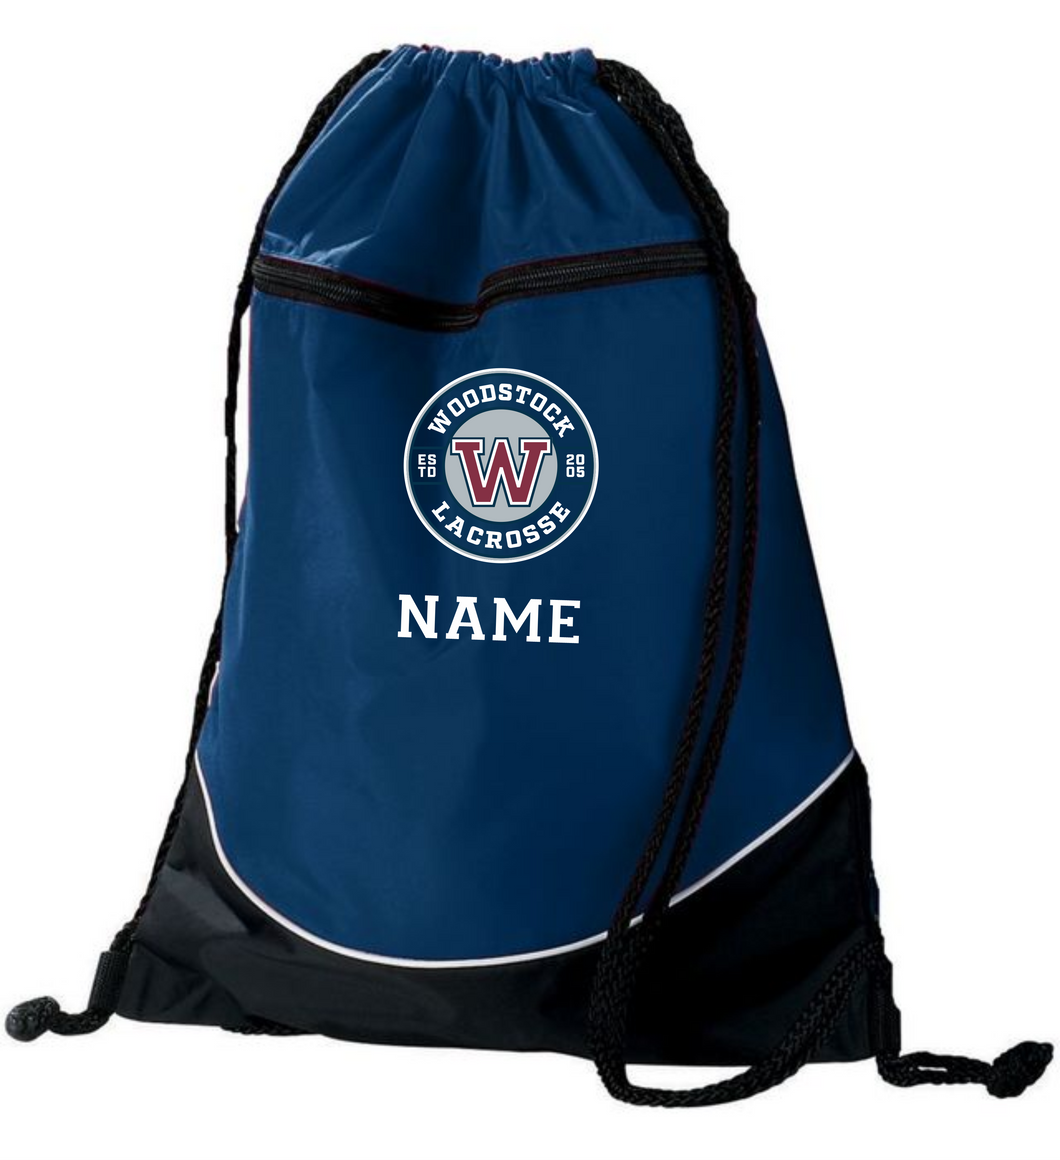 WW-LAX-950-2 - Augusta Tri-Color Drawstring Backpack - Woodstock W LAX Logo & Personalized Name